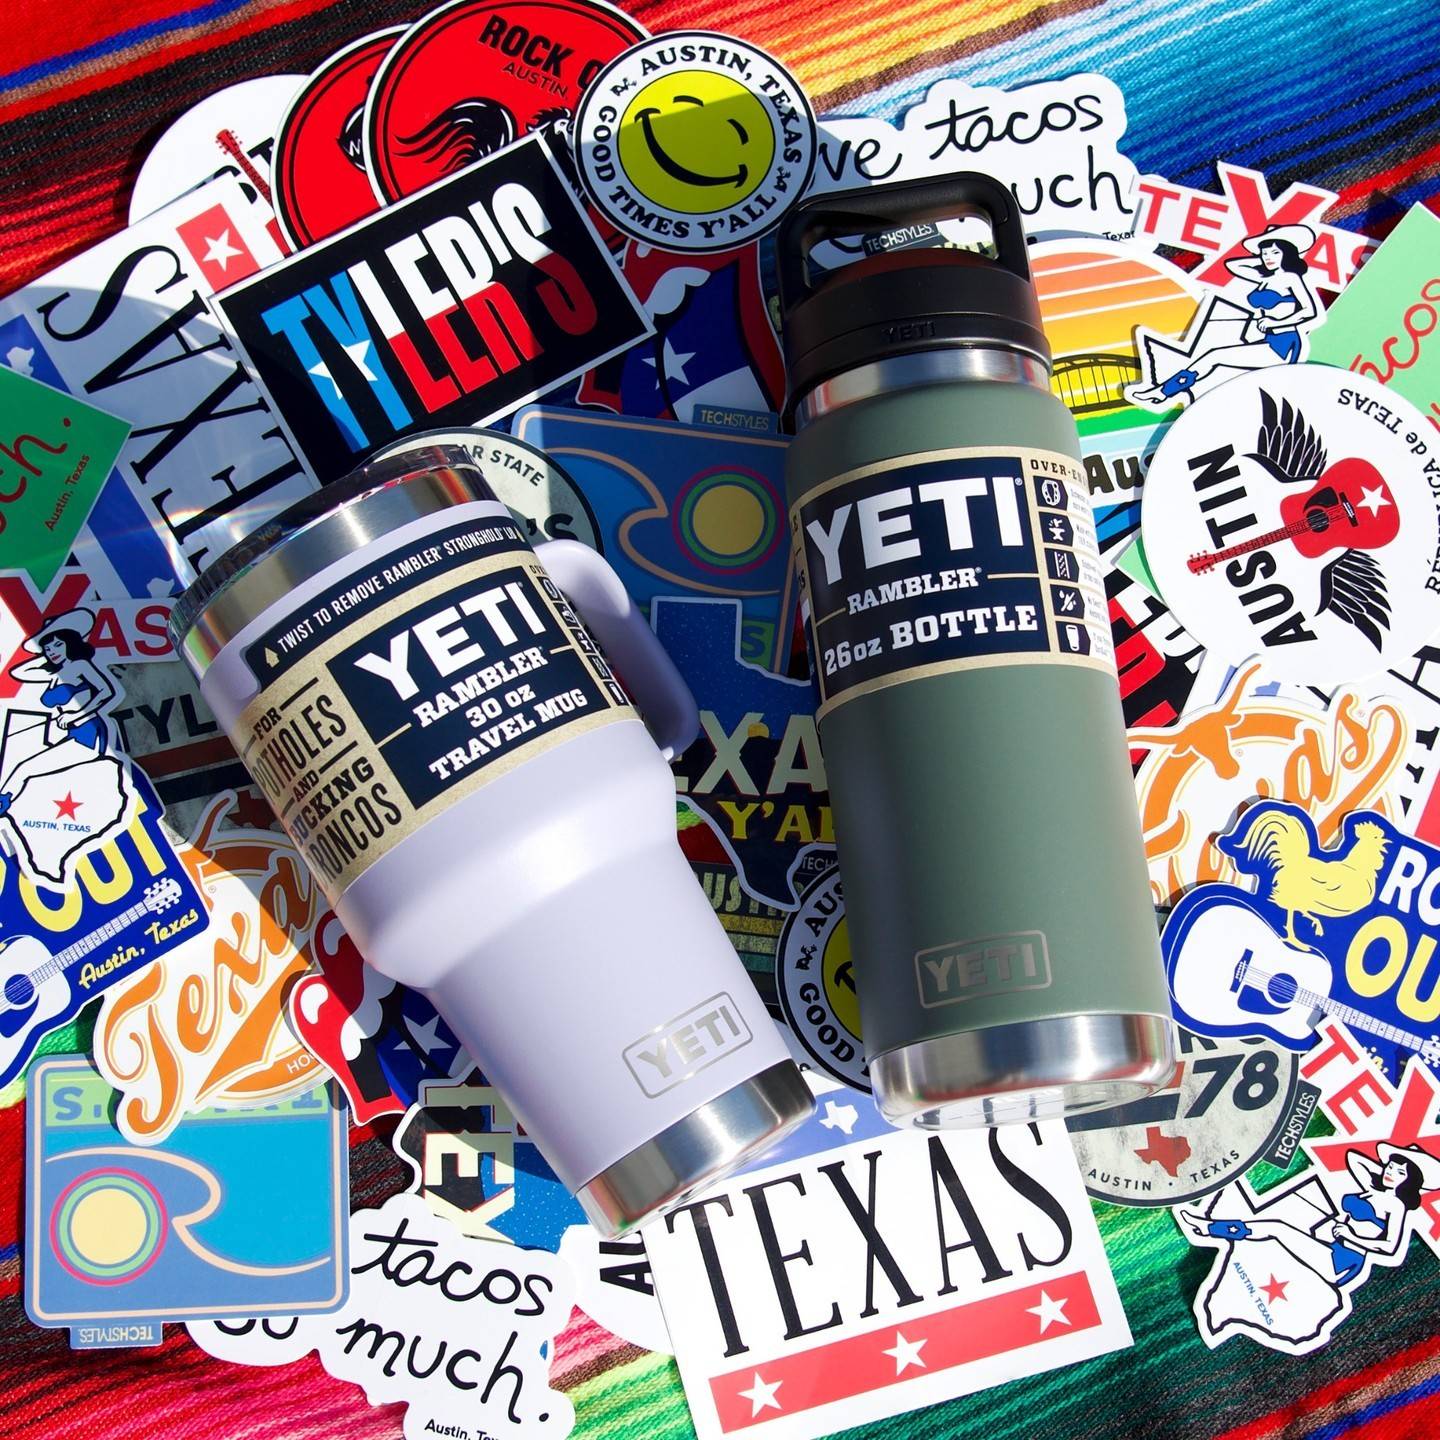 Case display of Yeti cups on top of Texas themed stickers